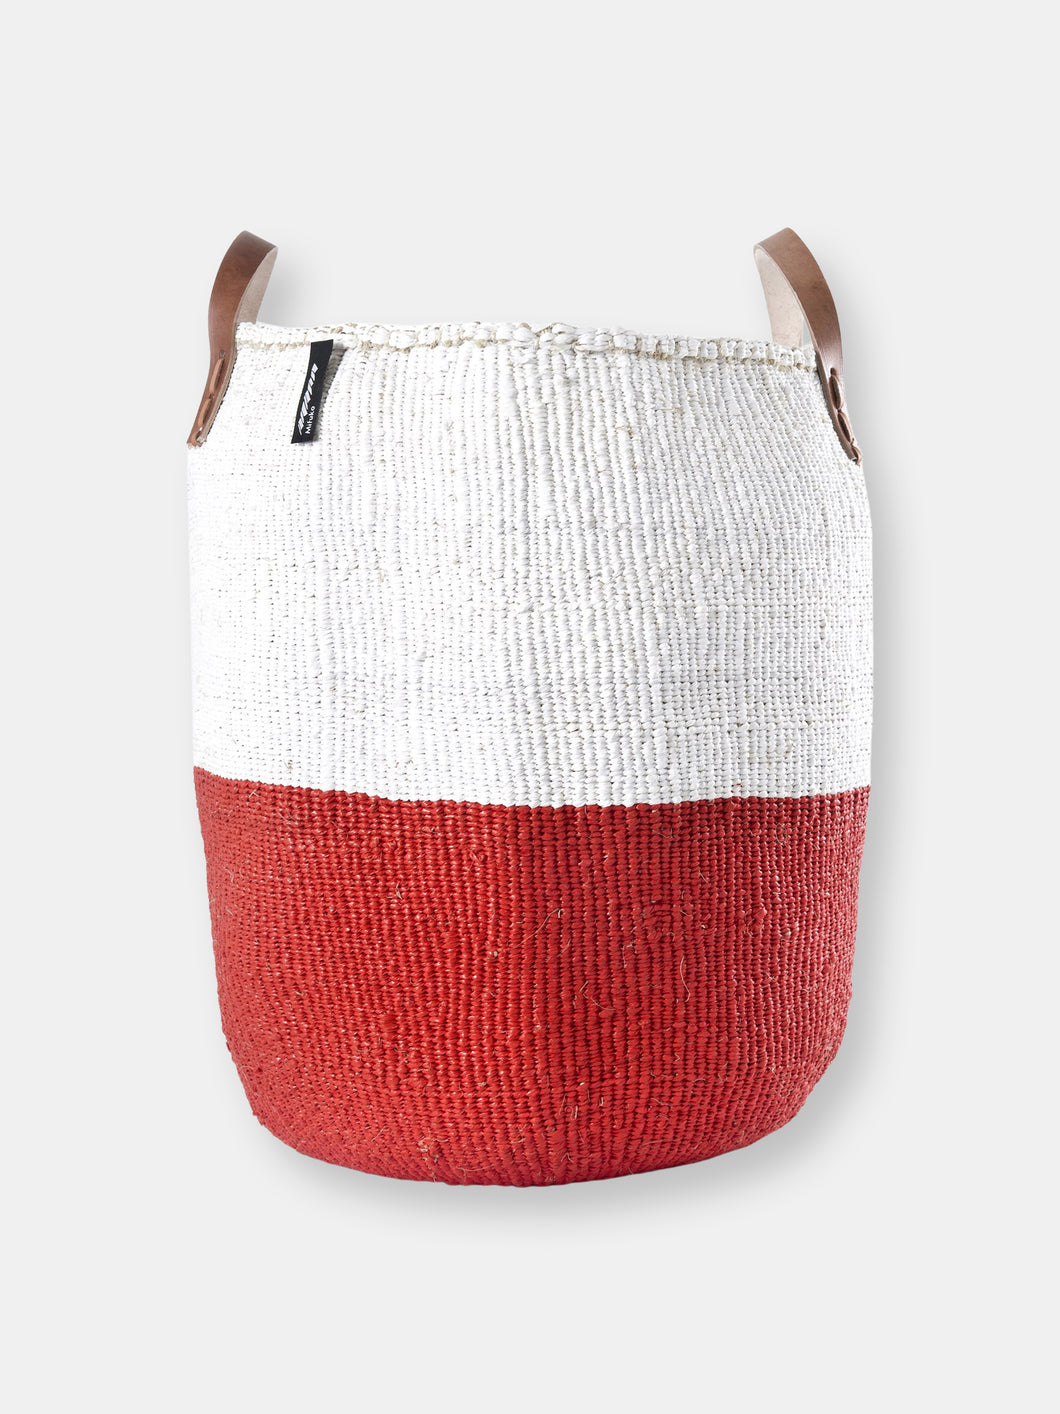 Mifuko - Large Red and White Tote Bag